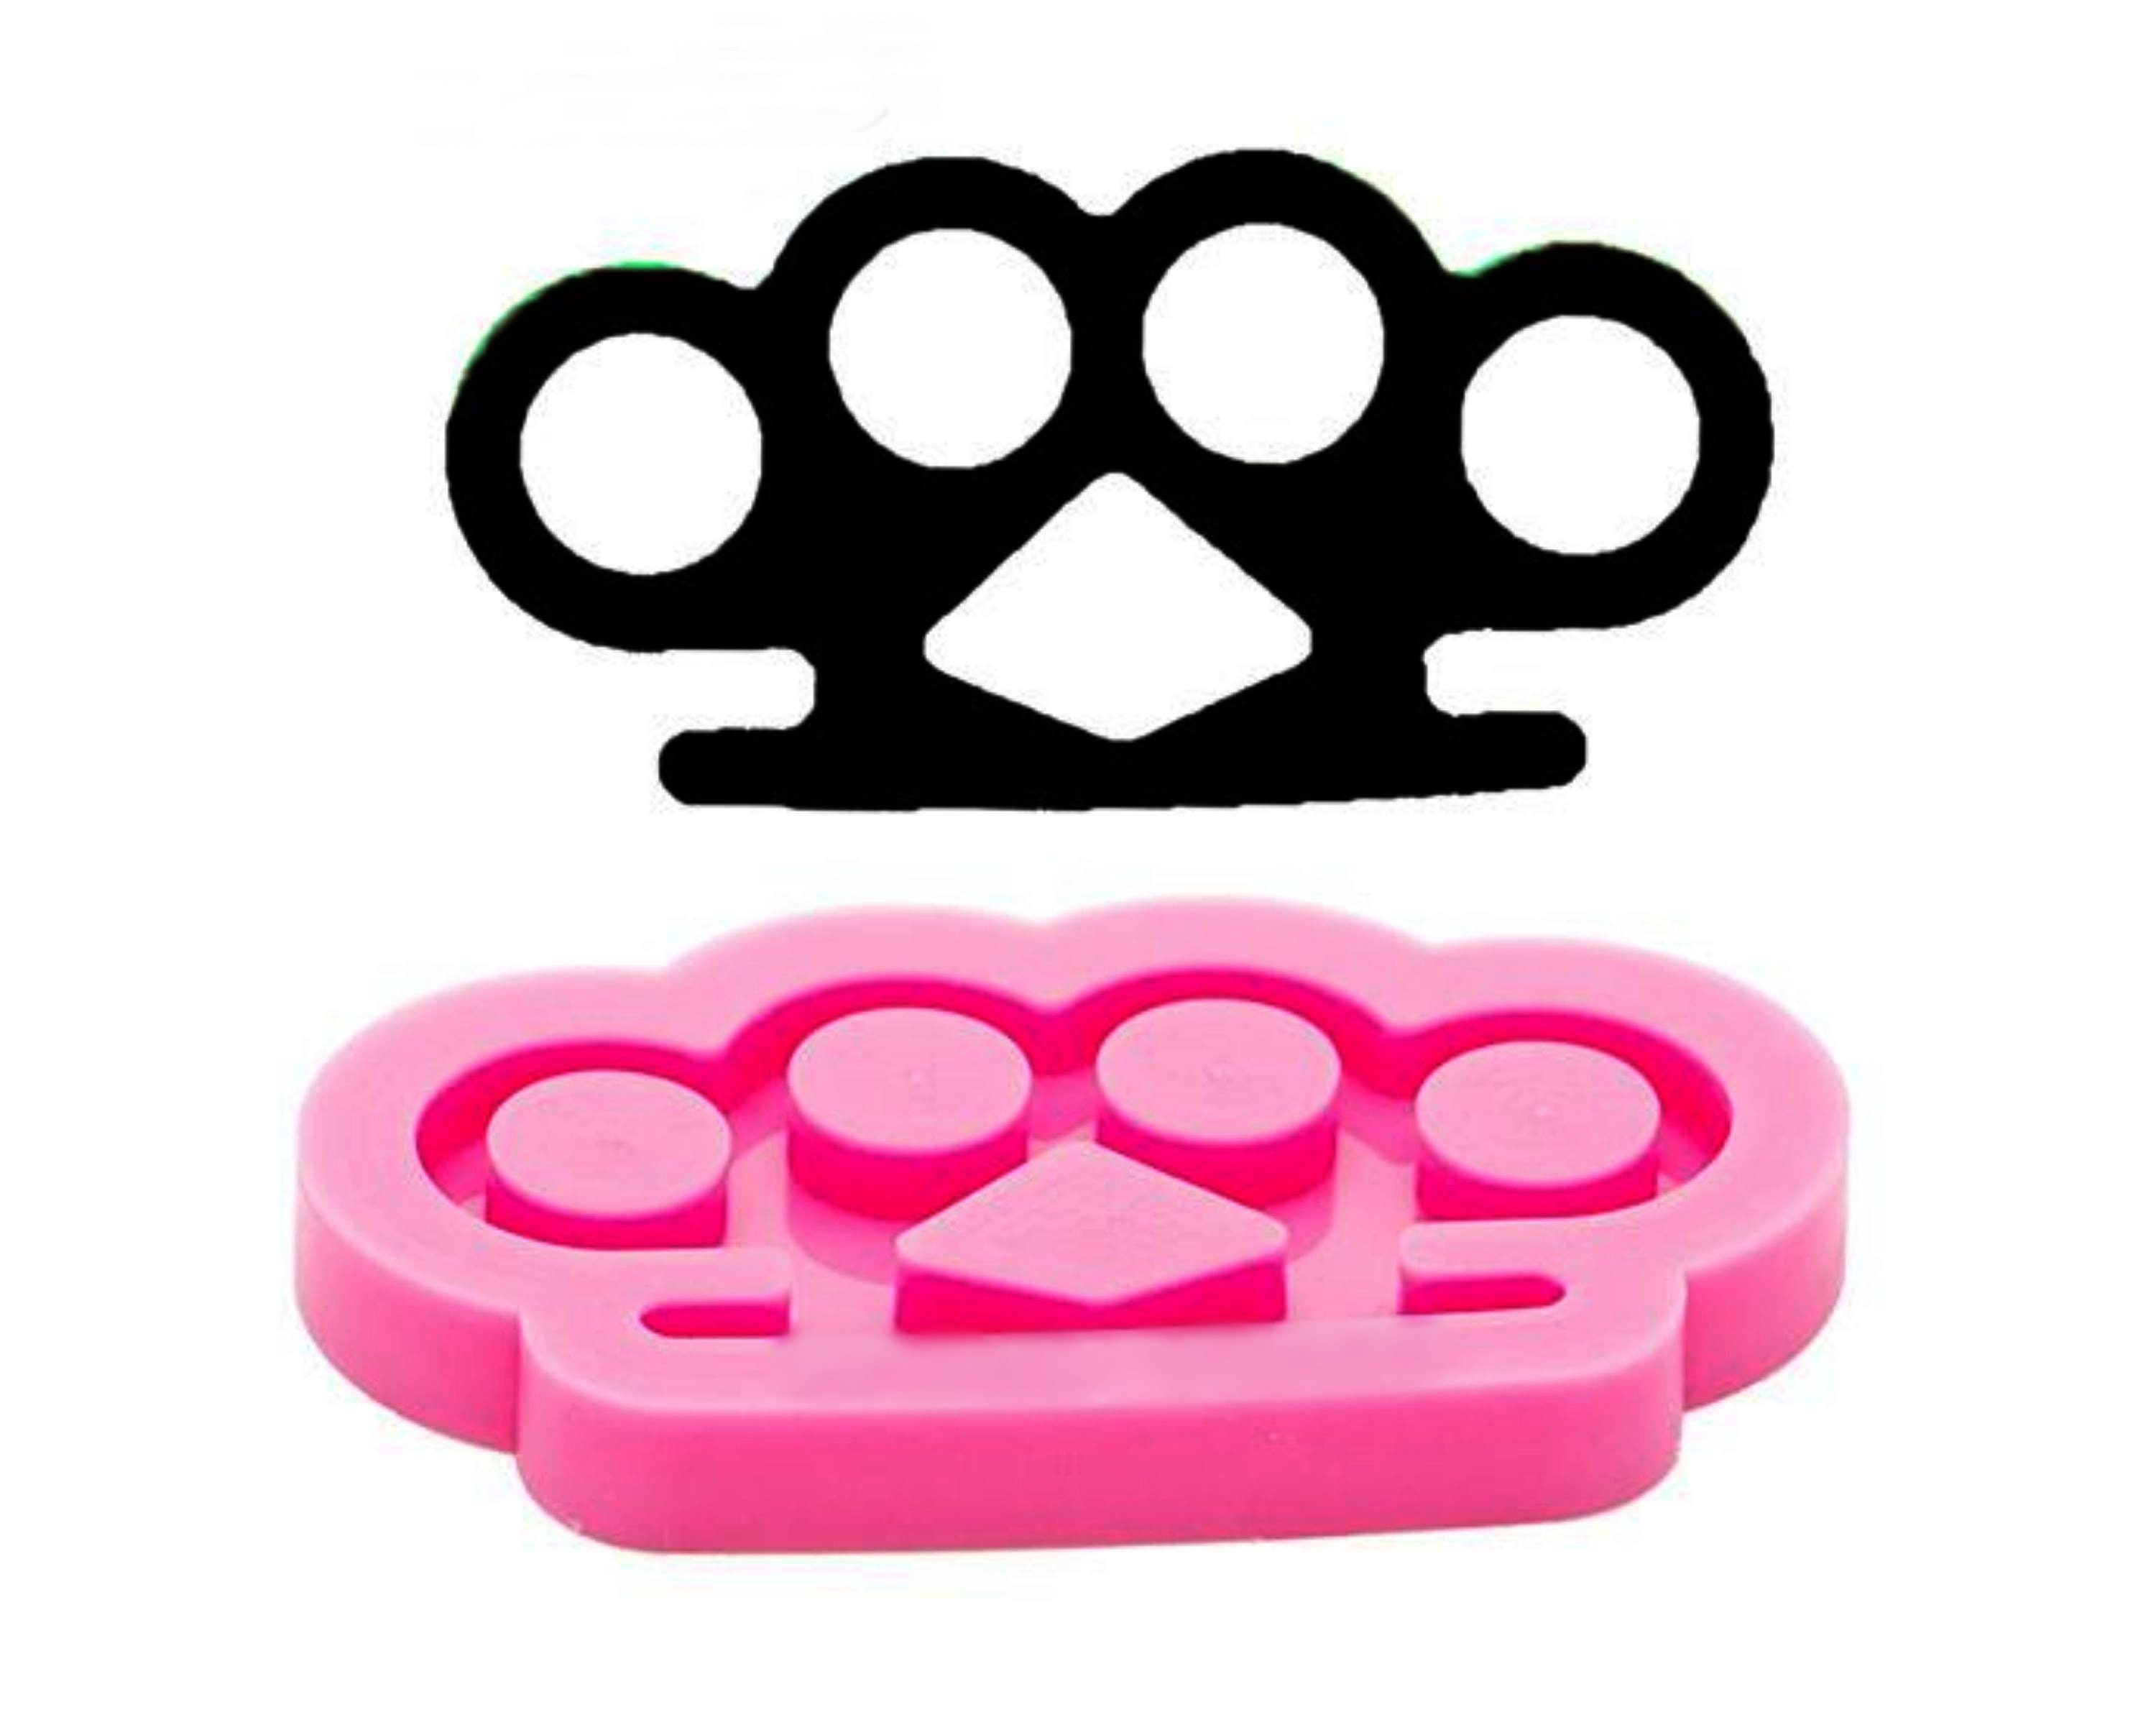 Brass Knuckles Mold Large Full Size Flexible Silicone Mould Crafts